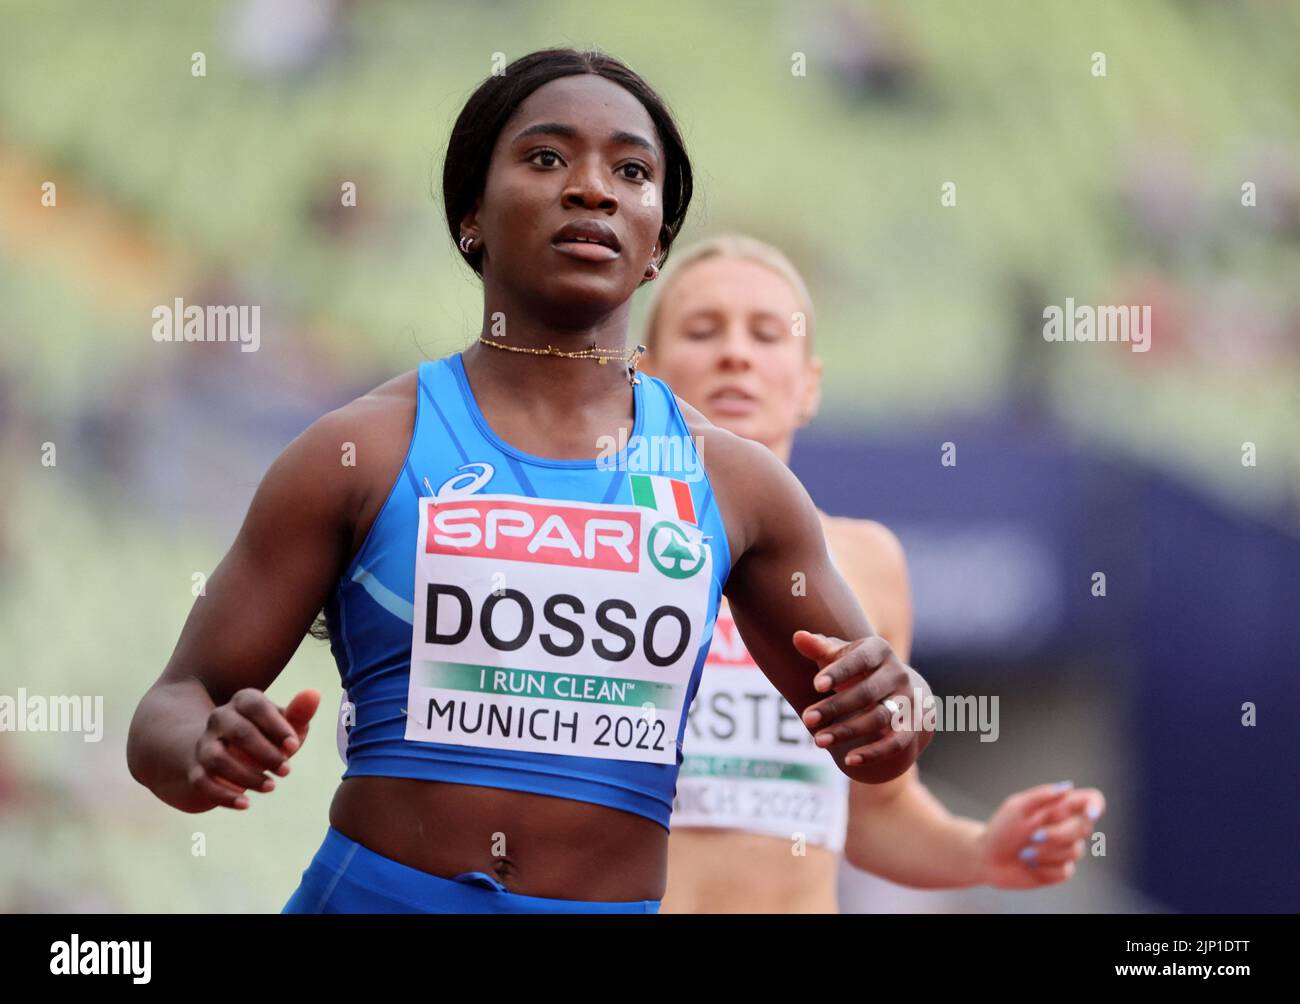 Athletics - 2022 European Championships - Olympiastadion, Munich, Germany - August 15, 2022 Italy's Zaynab Dosso reacts after she finish first during the Women's 100m Round 1 - Heats REUTERS/Wolfgang Rattay Stock Photo